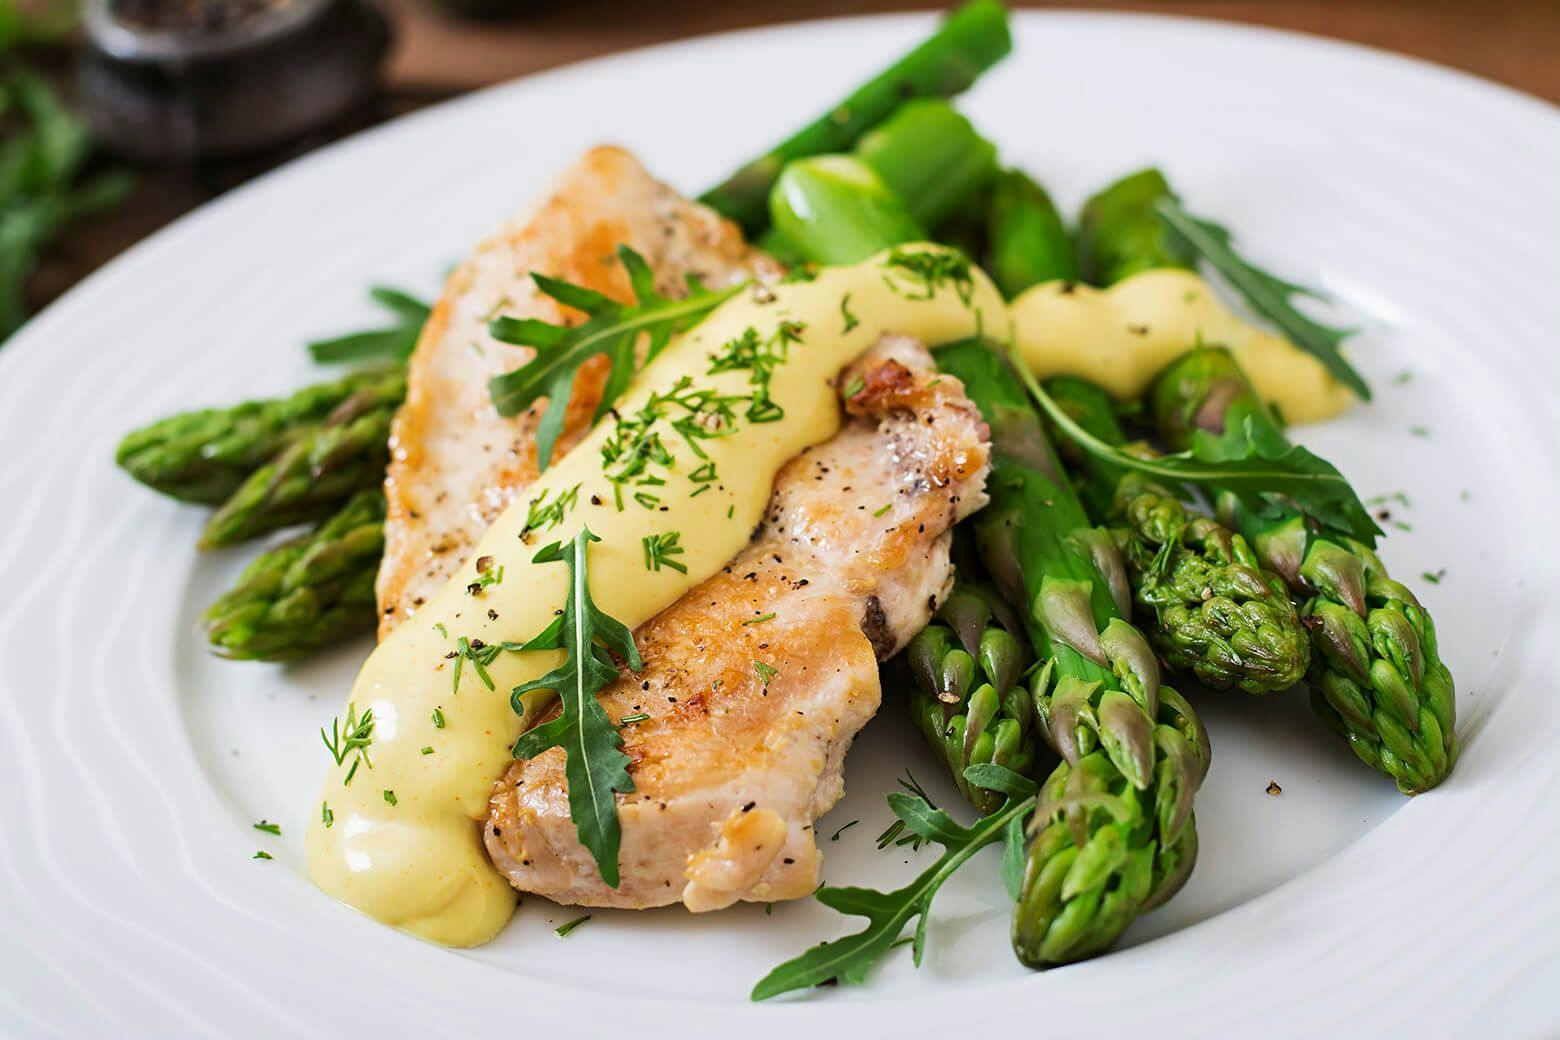 Grilled Chicken with Cream Sauce and Asparagus